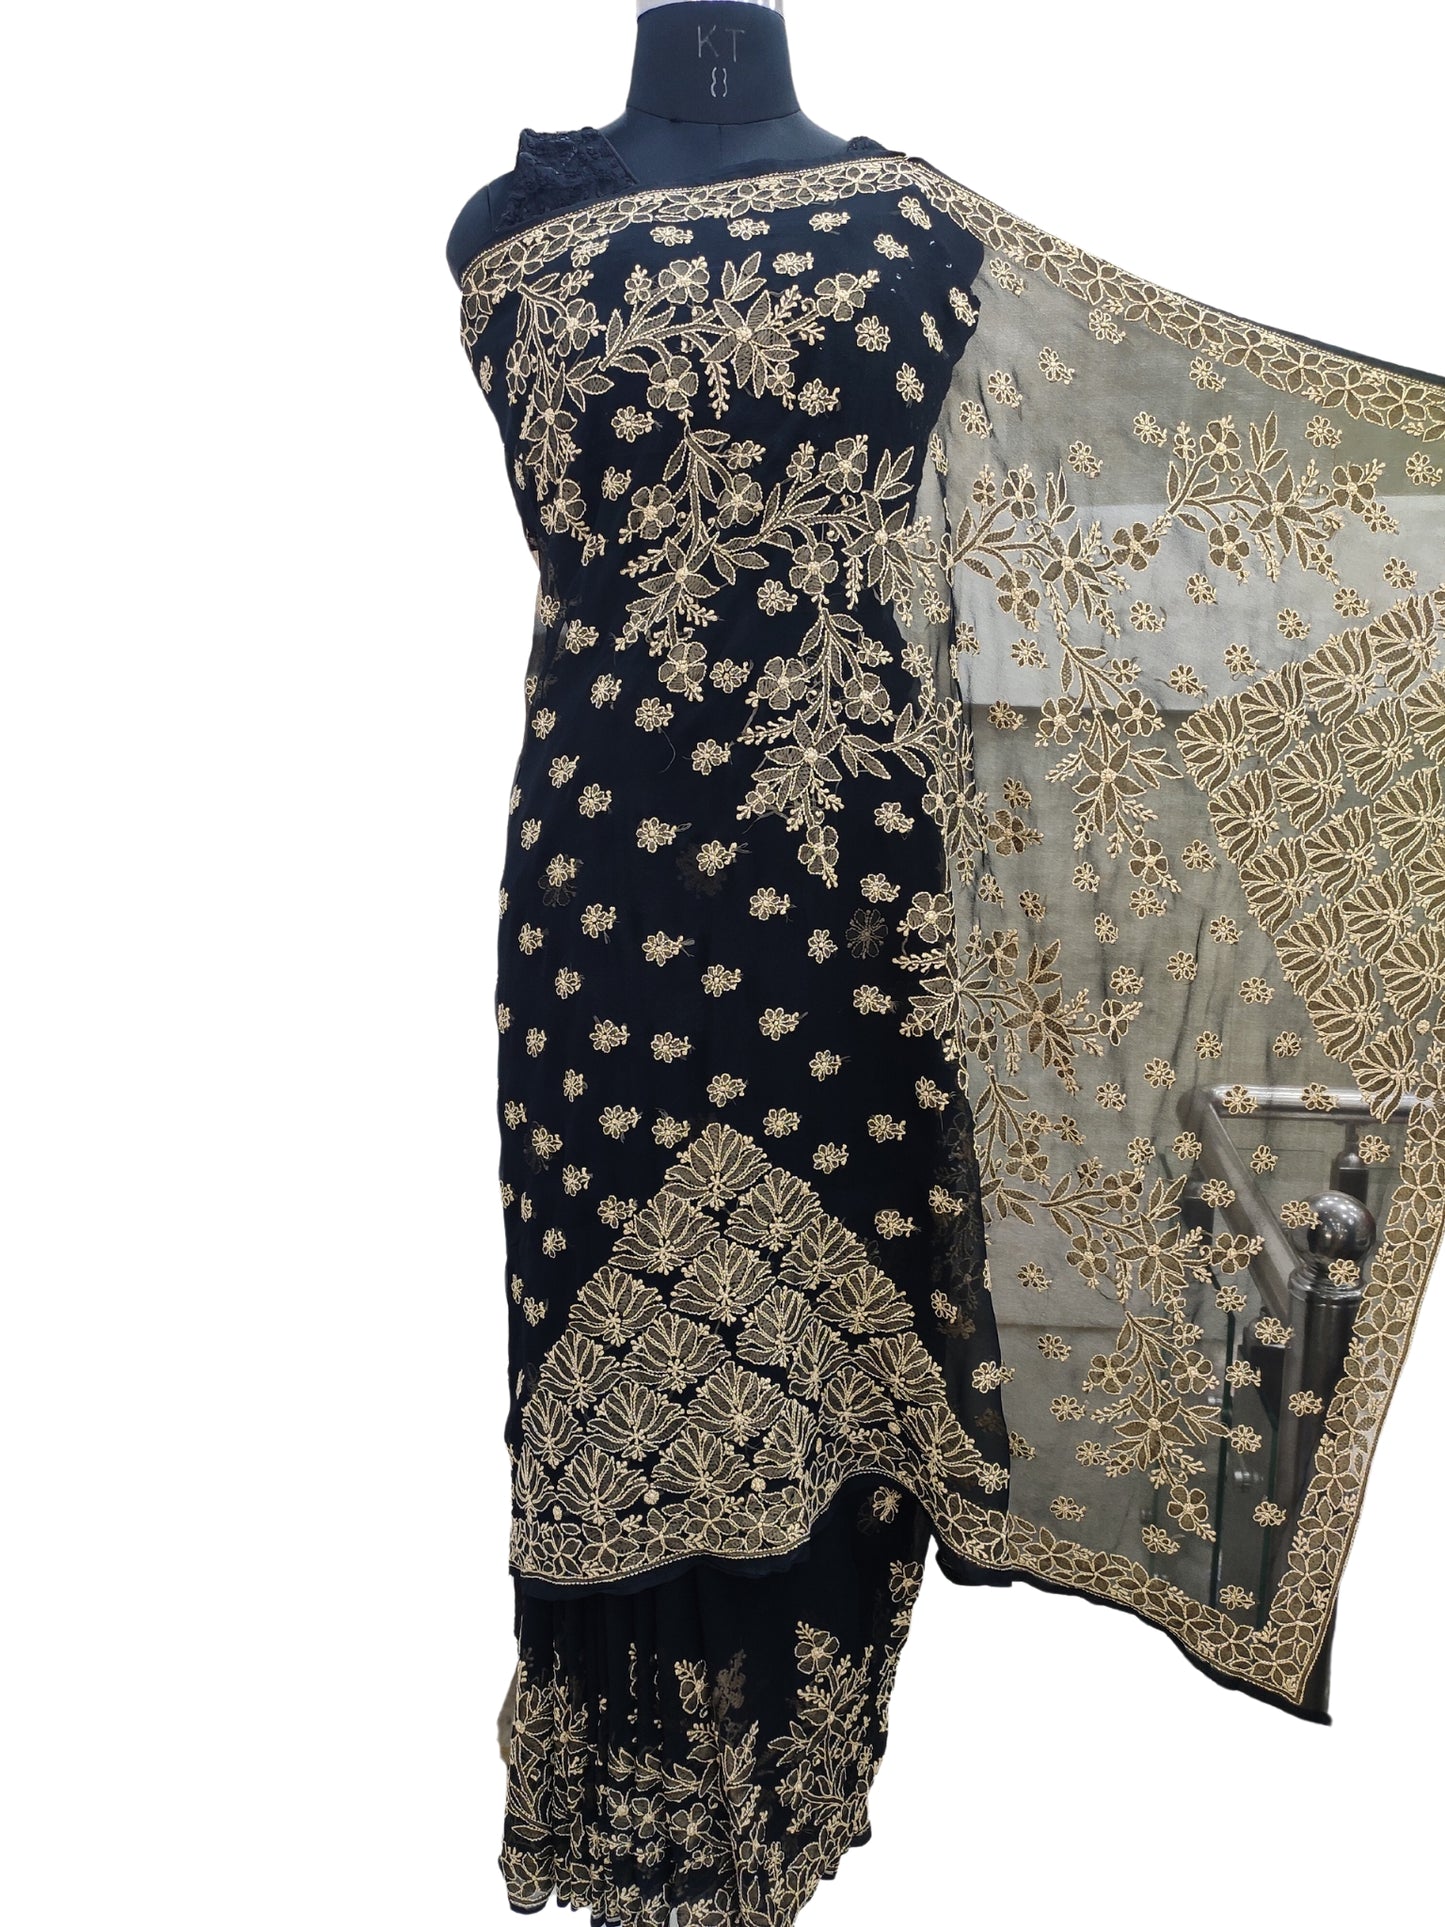 Shyamal Chikan Hand Embroidered Black Georgette Lucknowi Chikankari Skirt Saree With Blouse Piece - S18310